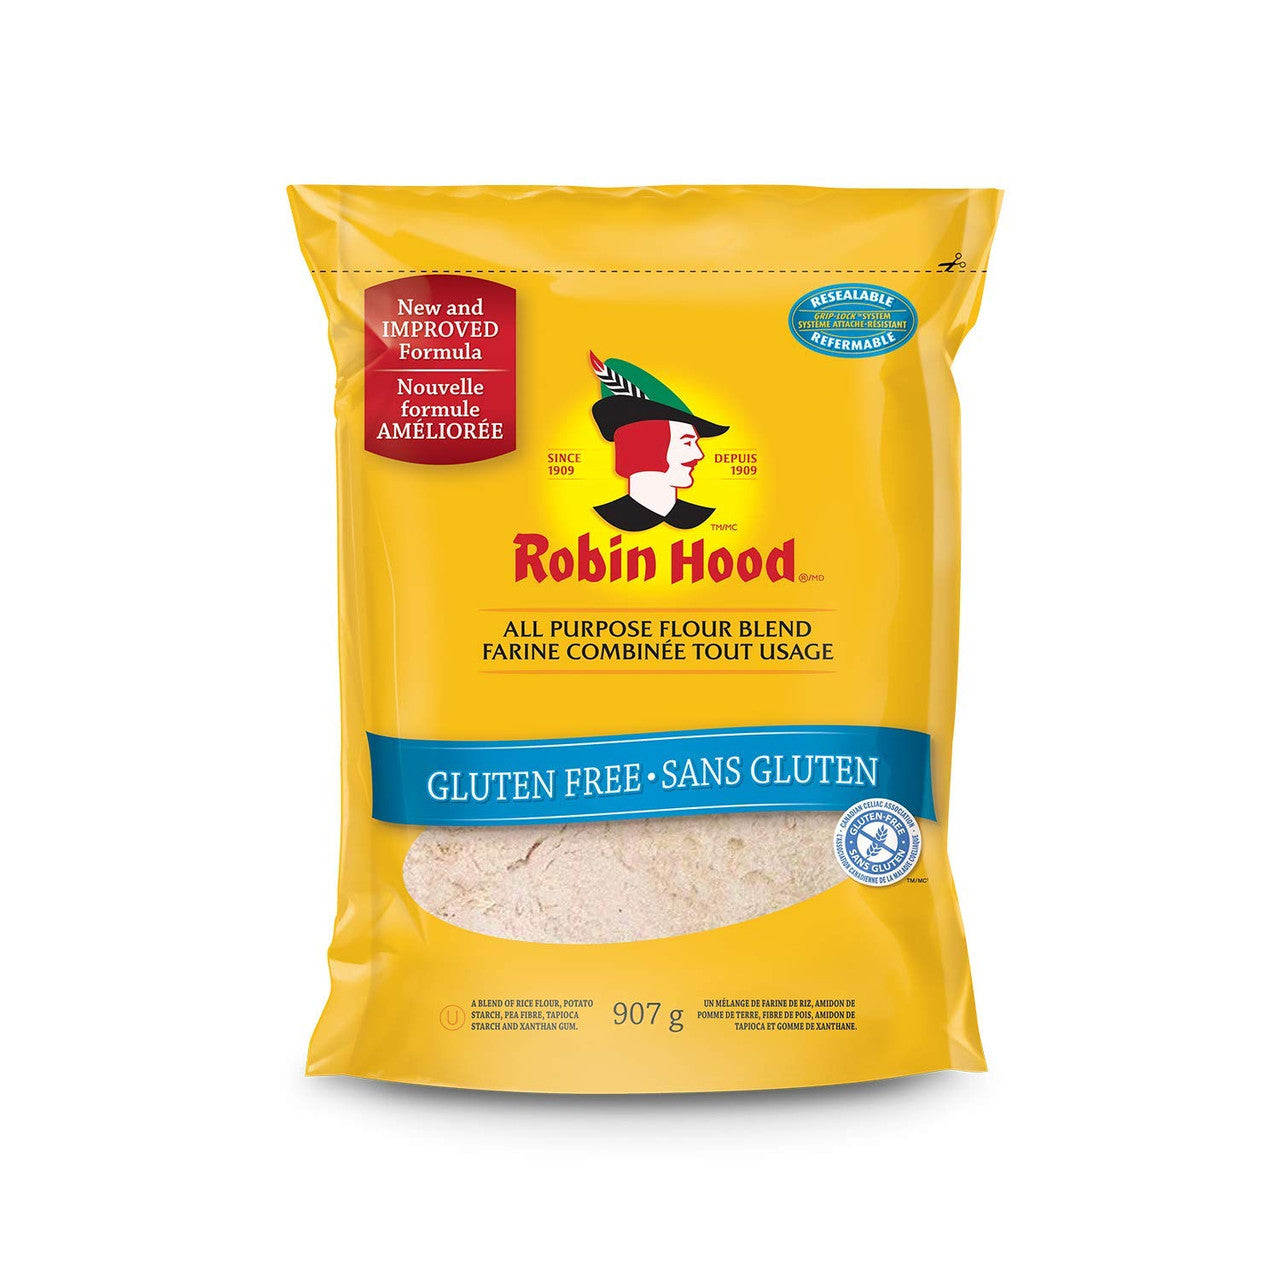 Robin Hood Gluten Free All Purpose Flour Blend 907g/32 oz. {Imported from Canada}